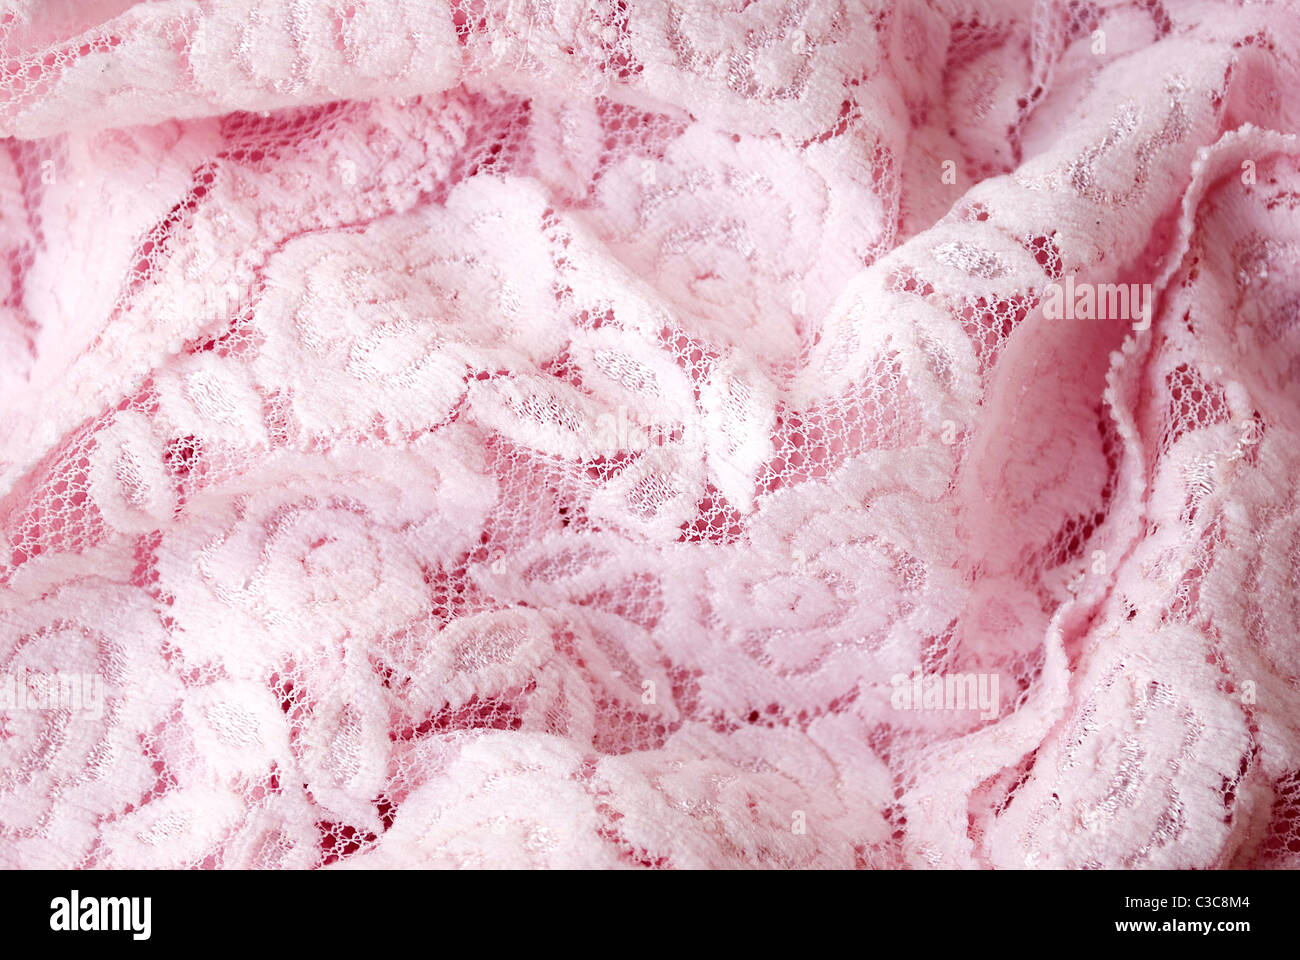 Texture, Background Fabric Pink Lace Stock Image - Image of backdrop,  decorative: 122798241